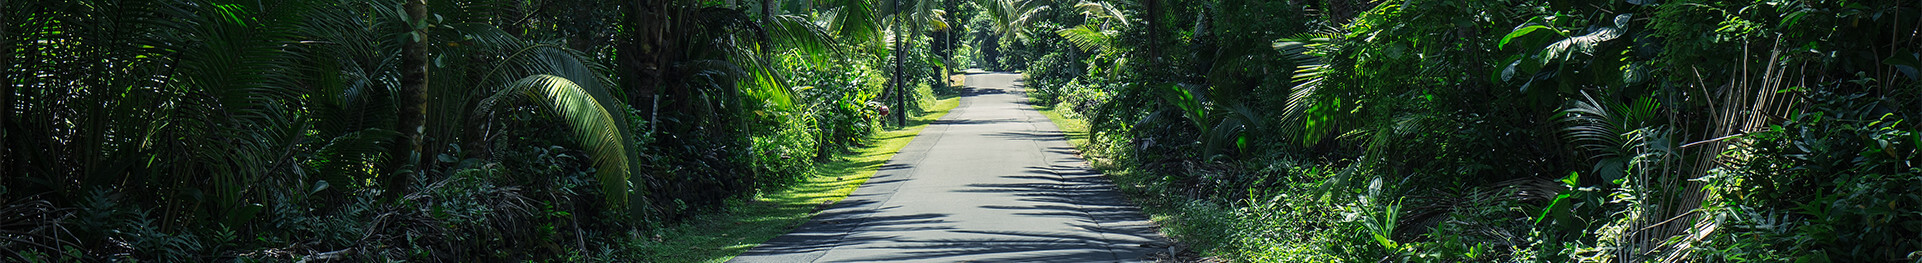 Narrow road with tropical tree and plant surroundings